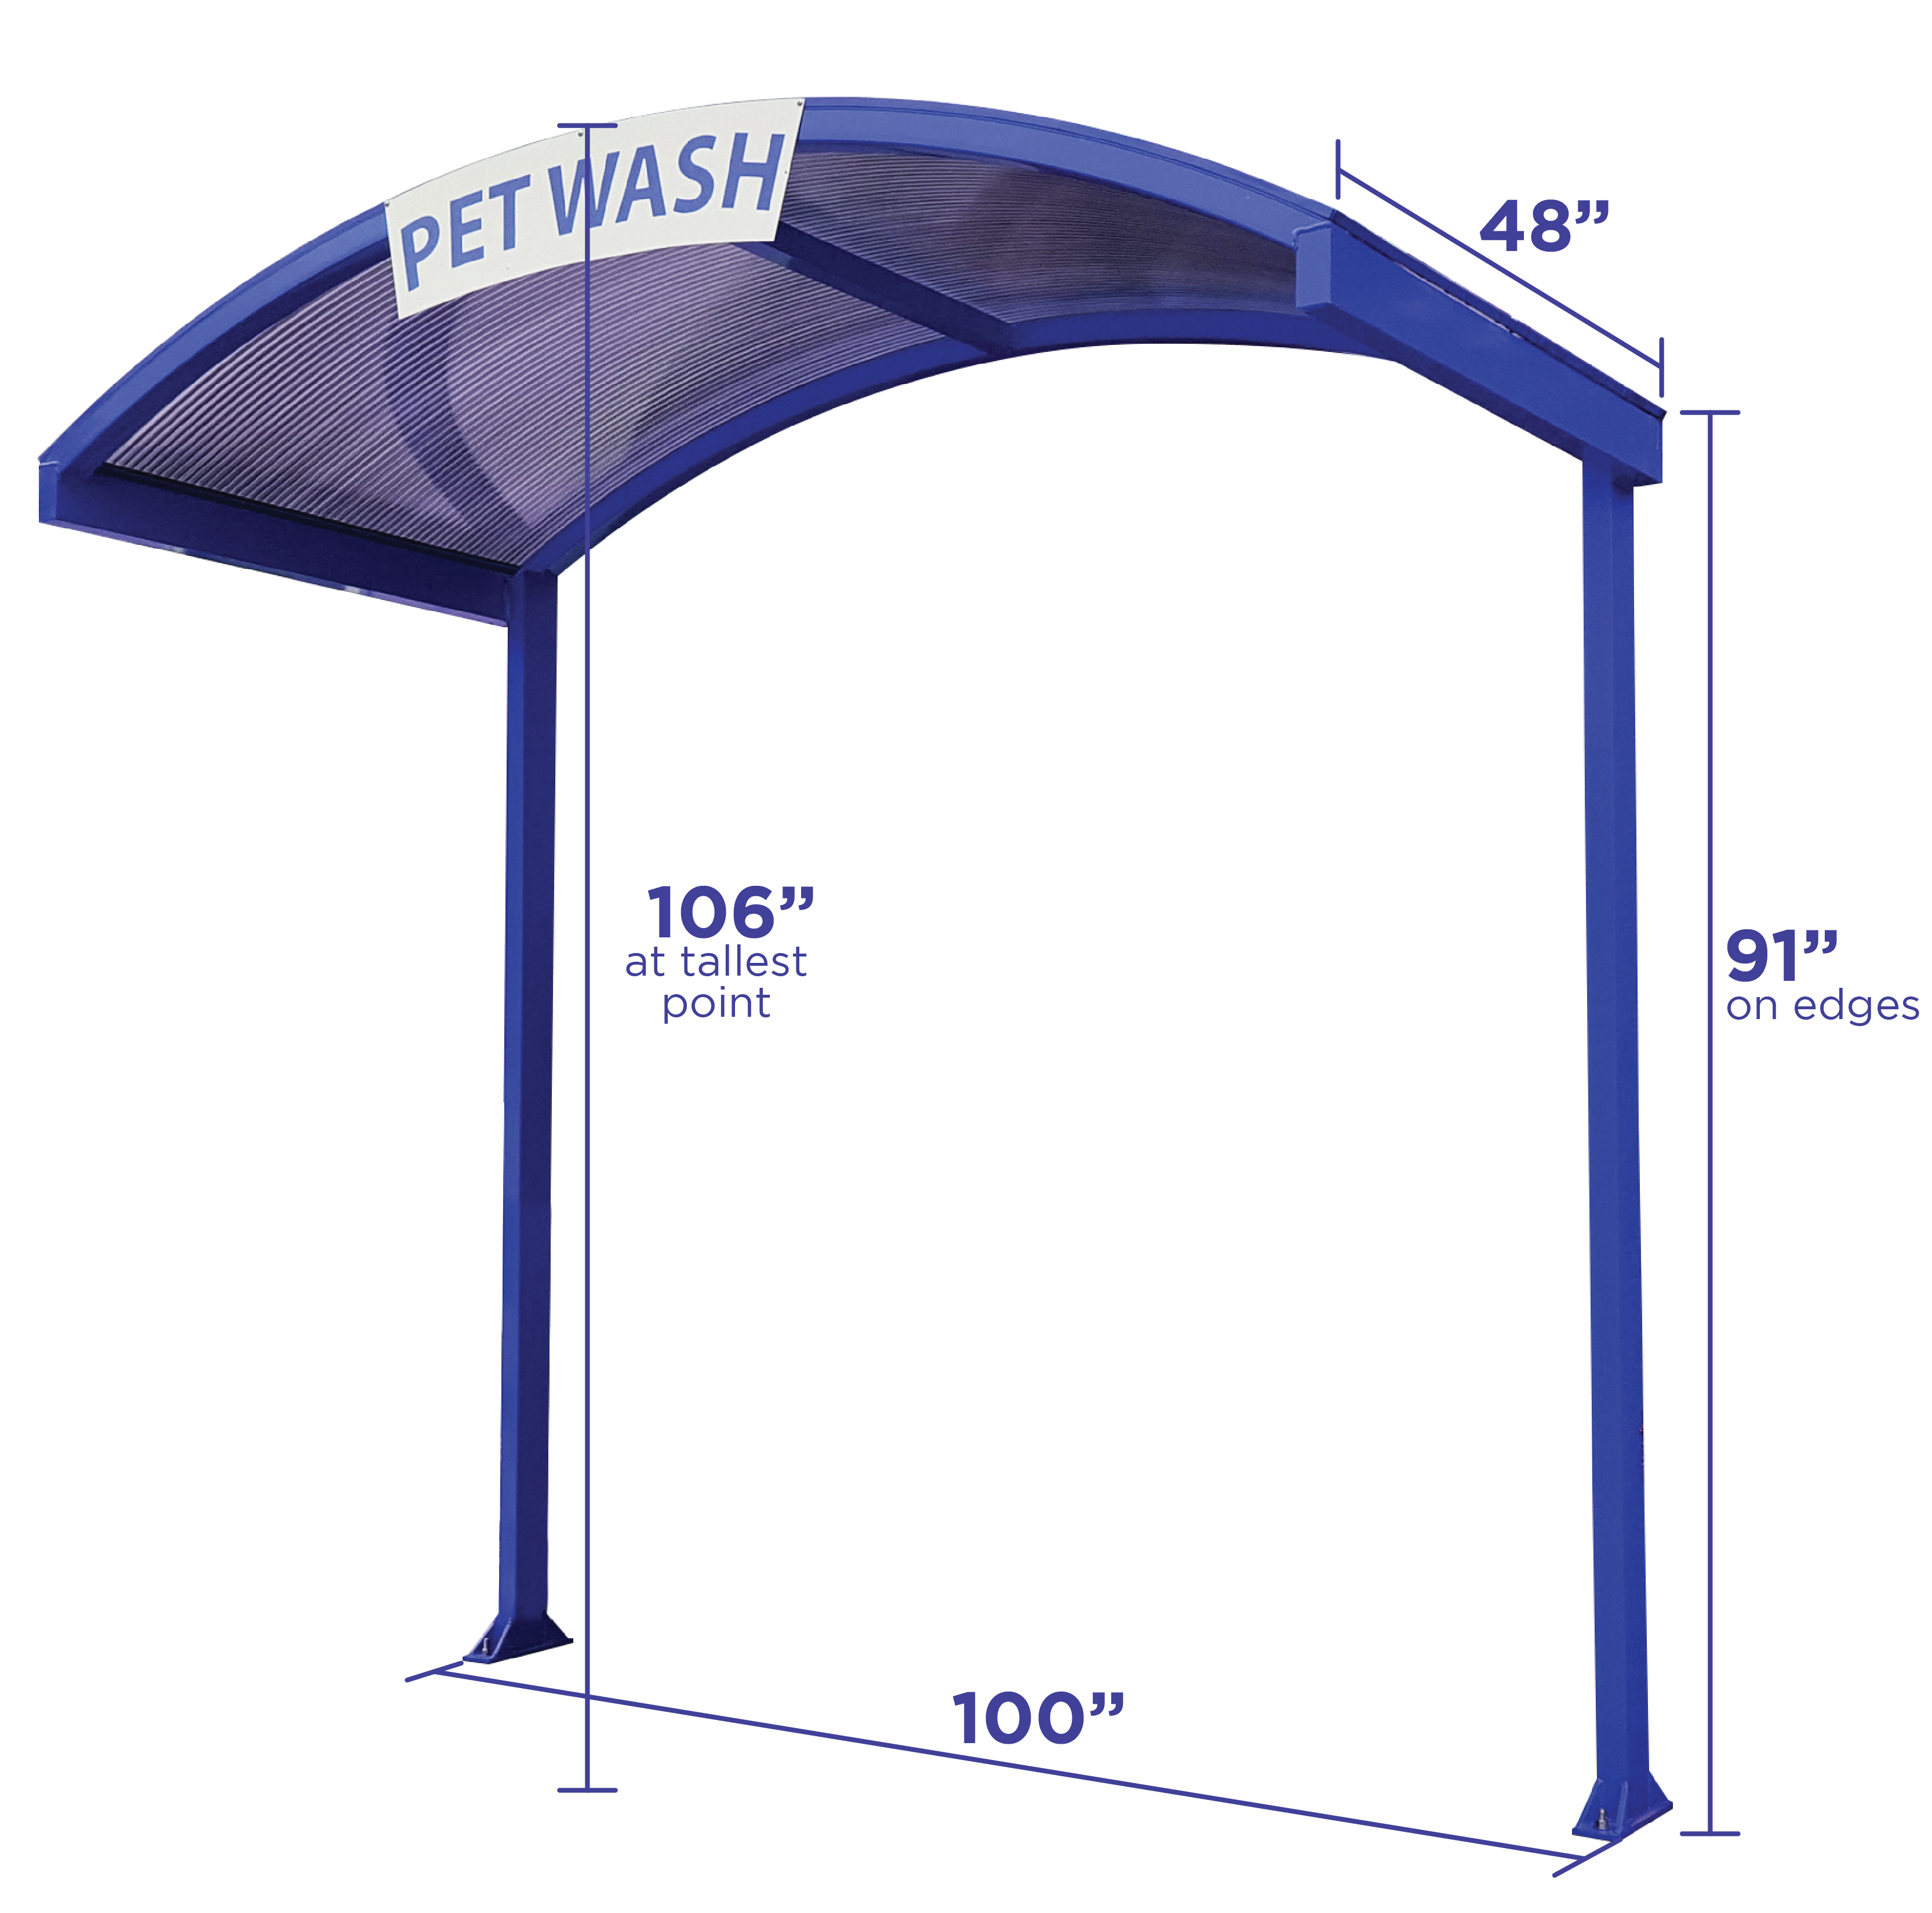 Awning with Measurements